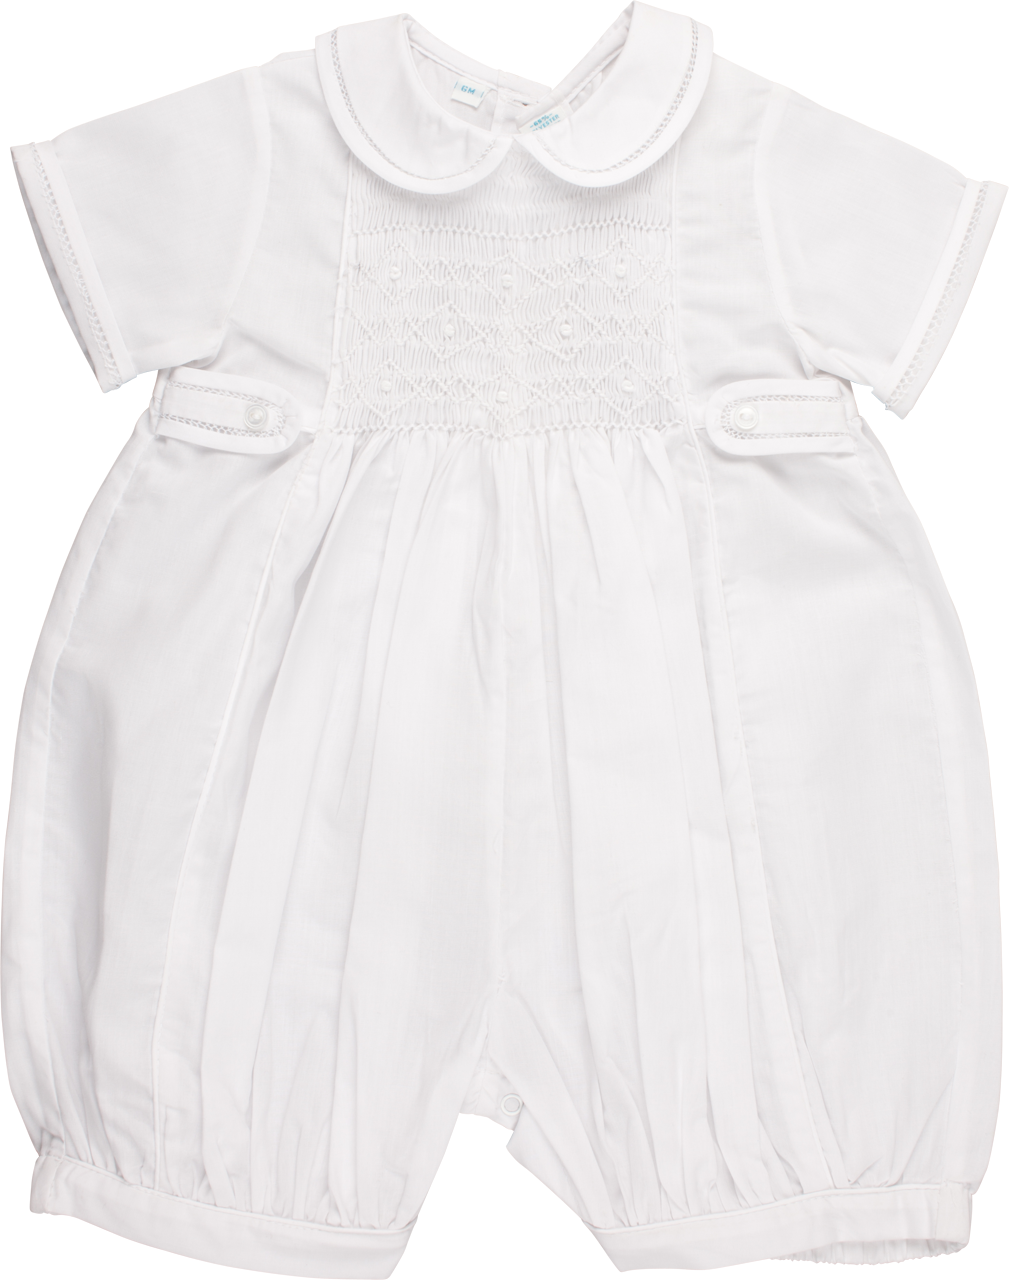 Boys Infant White Bubble Style Romper with White Smocking